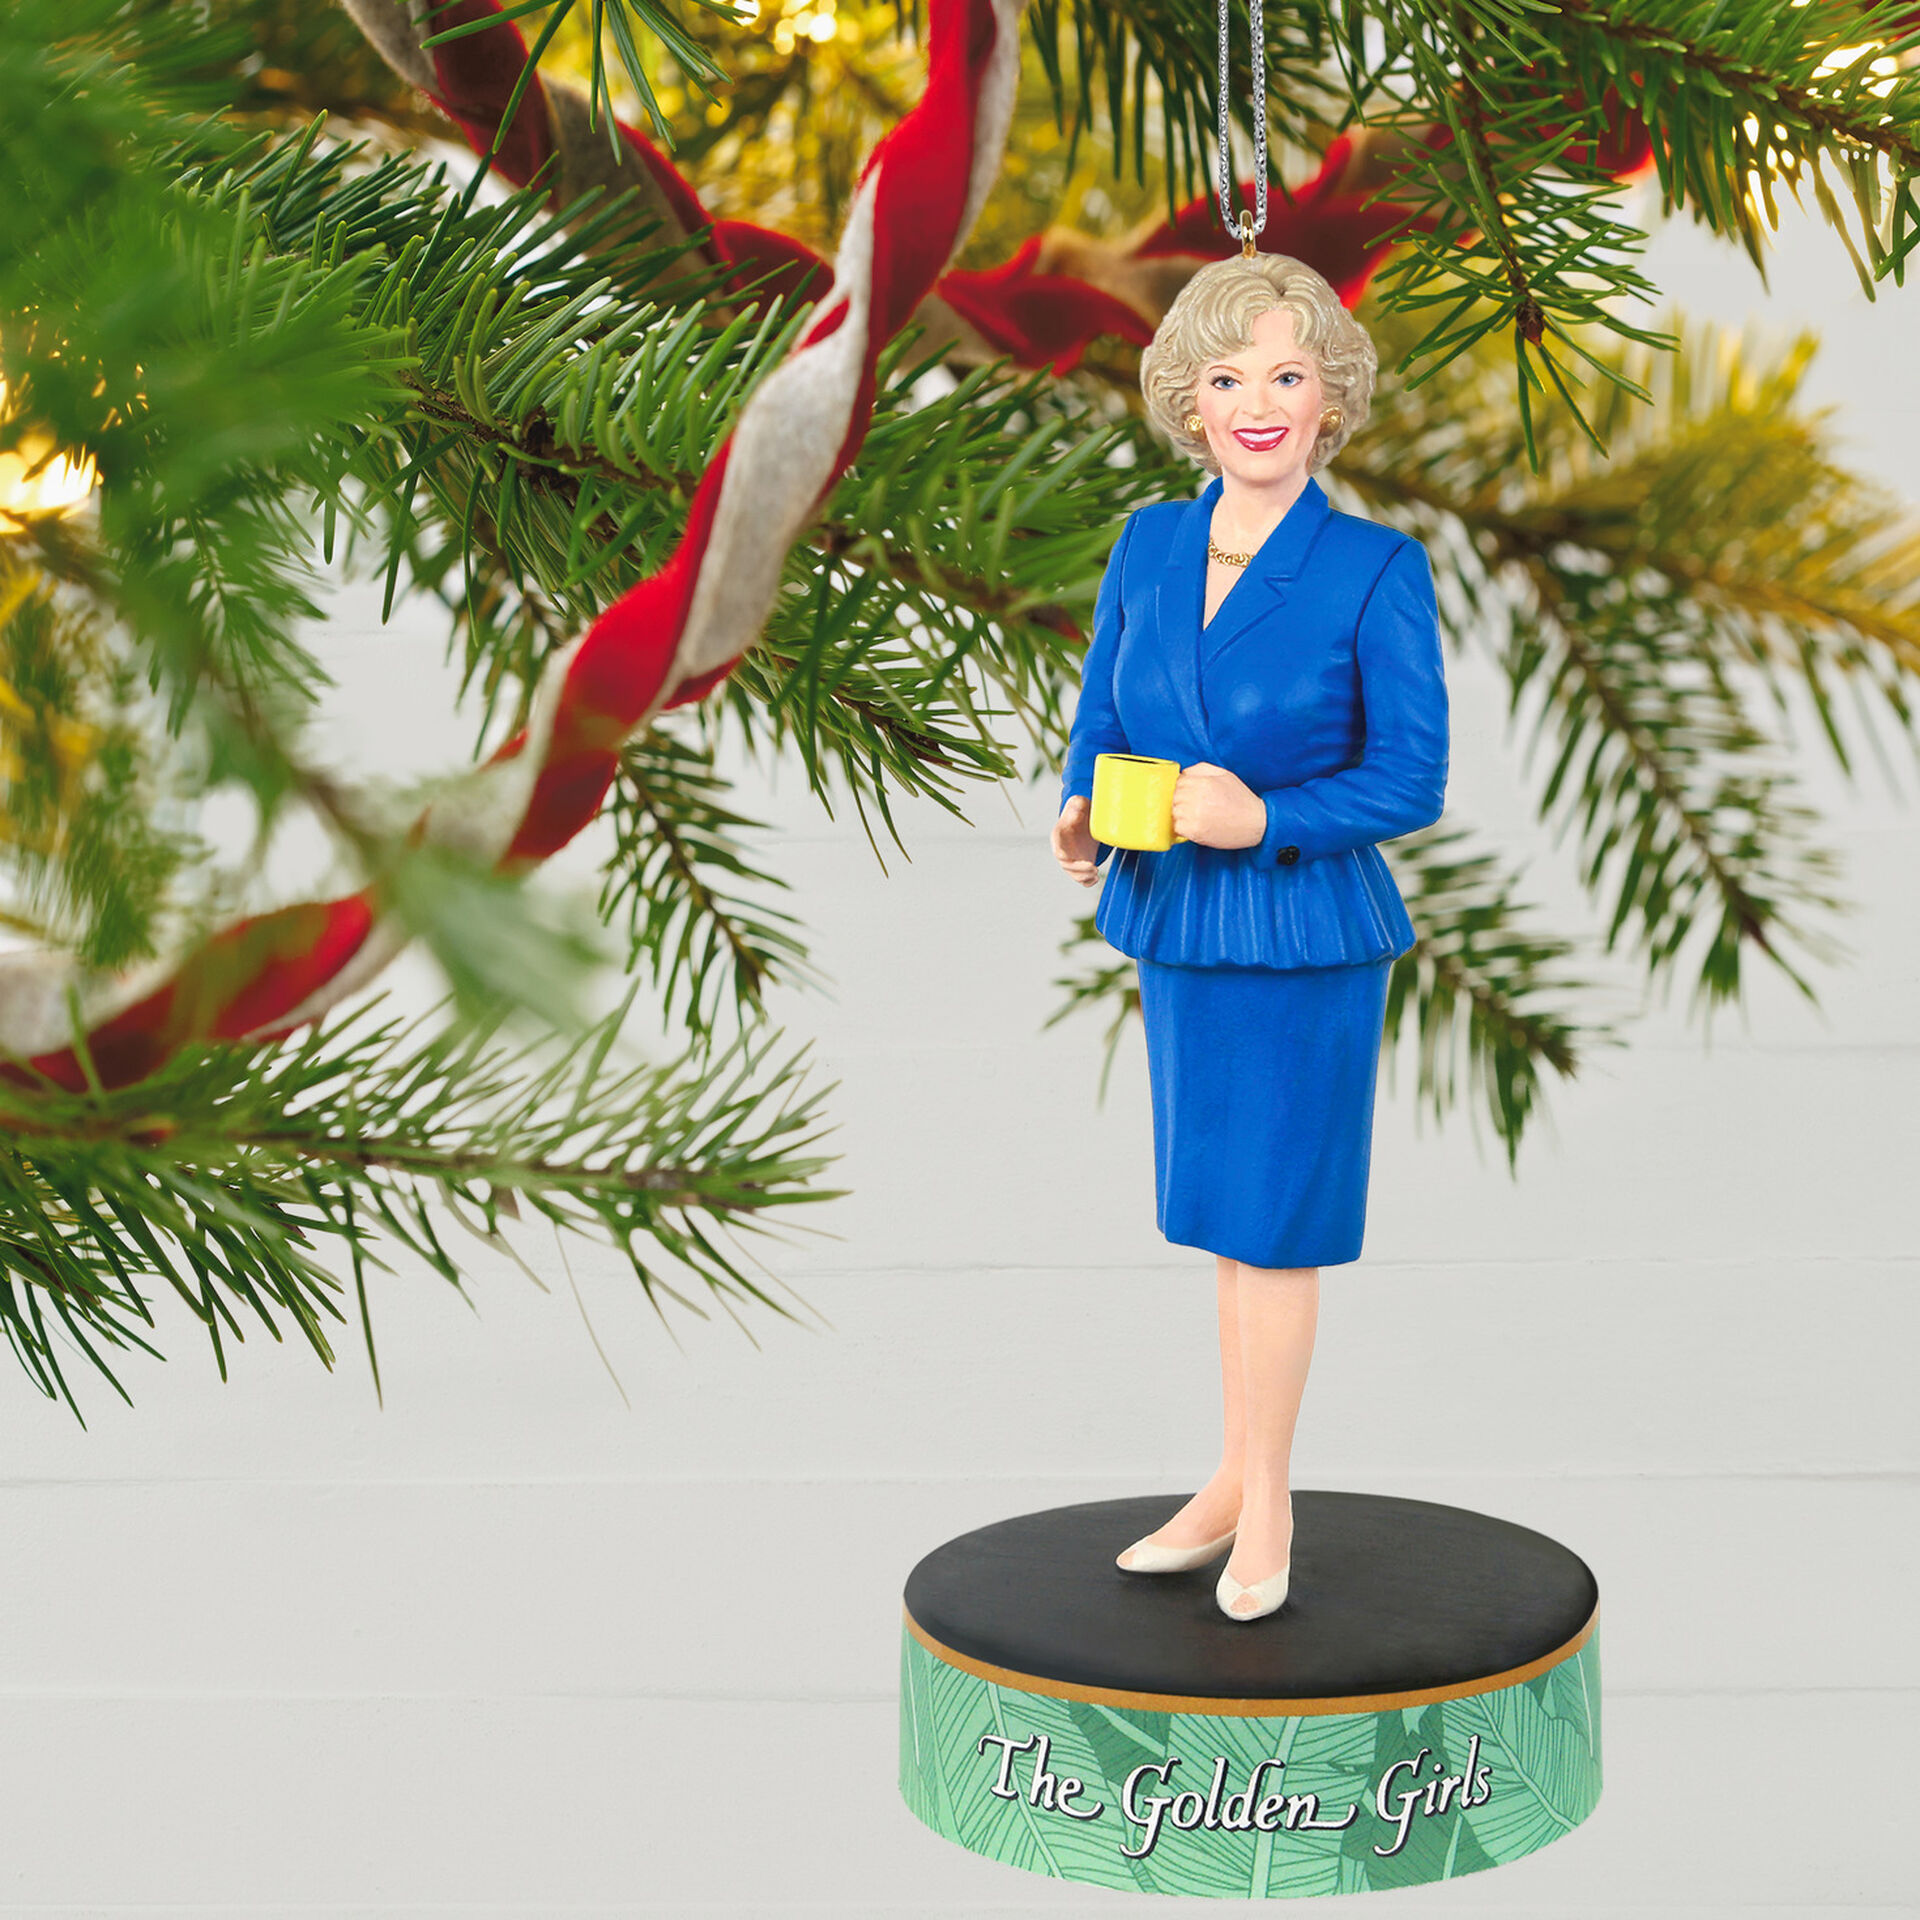 The Golden Girls Rose Nylund Ornament With Sound